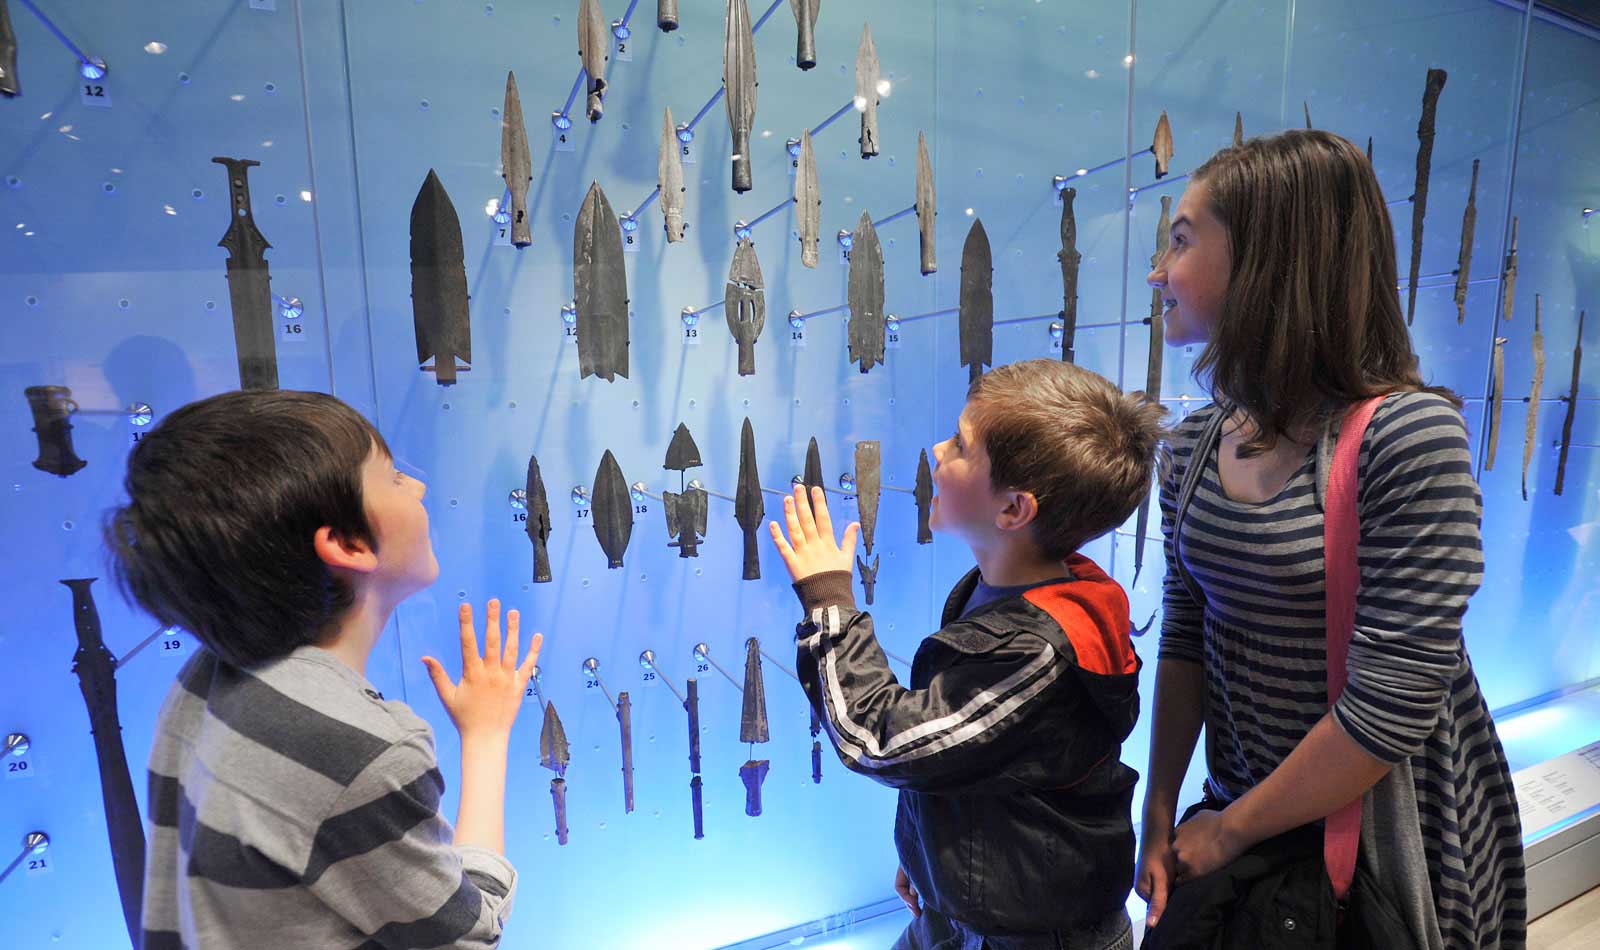 The museum holds a nationally important collection of Bronze Age material. In the gallery you can see the wealth of objects, including stunning bronze weapons.